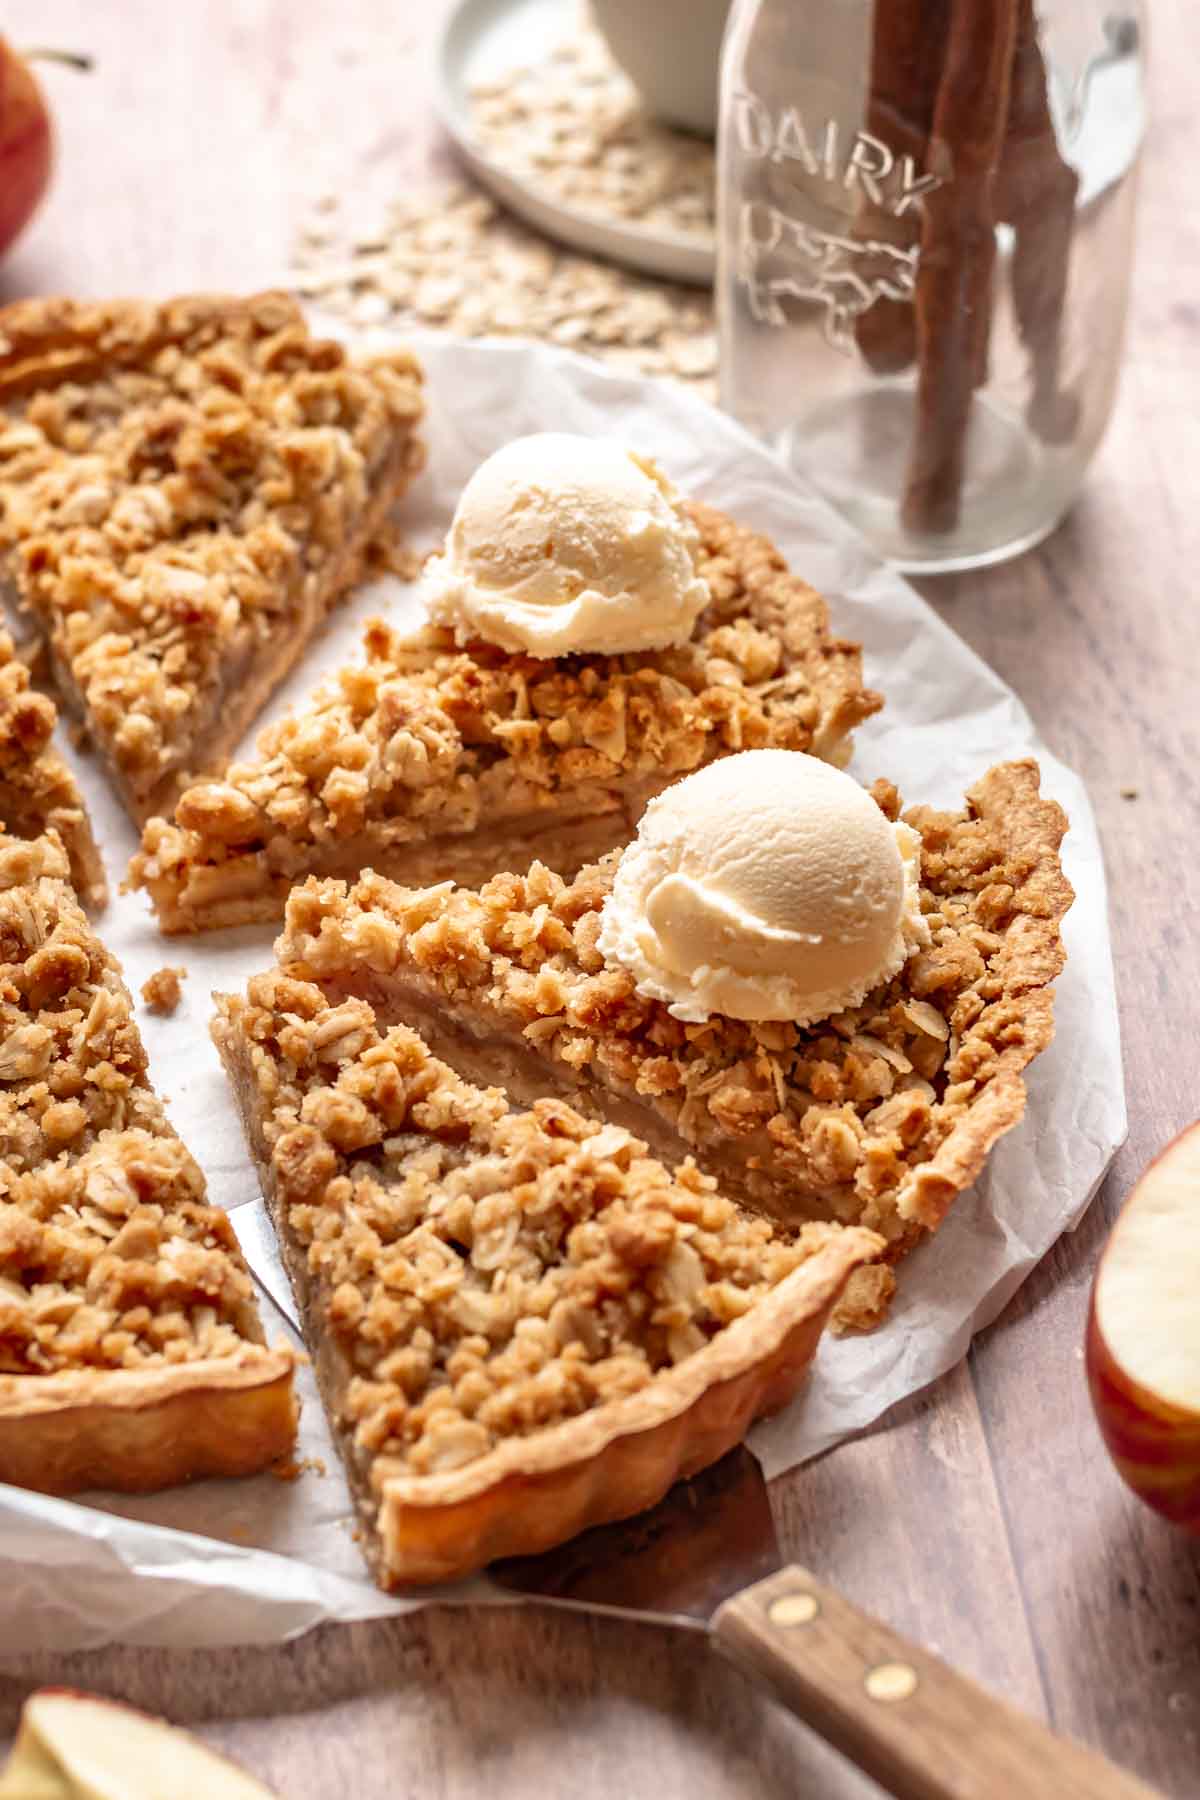 Sliced apple crumble tart with a scoop of ice cream on two of the slices.